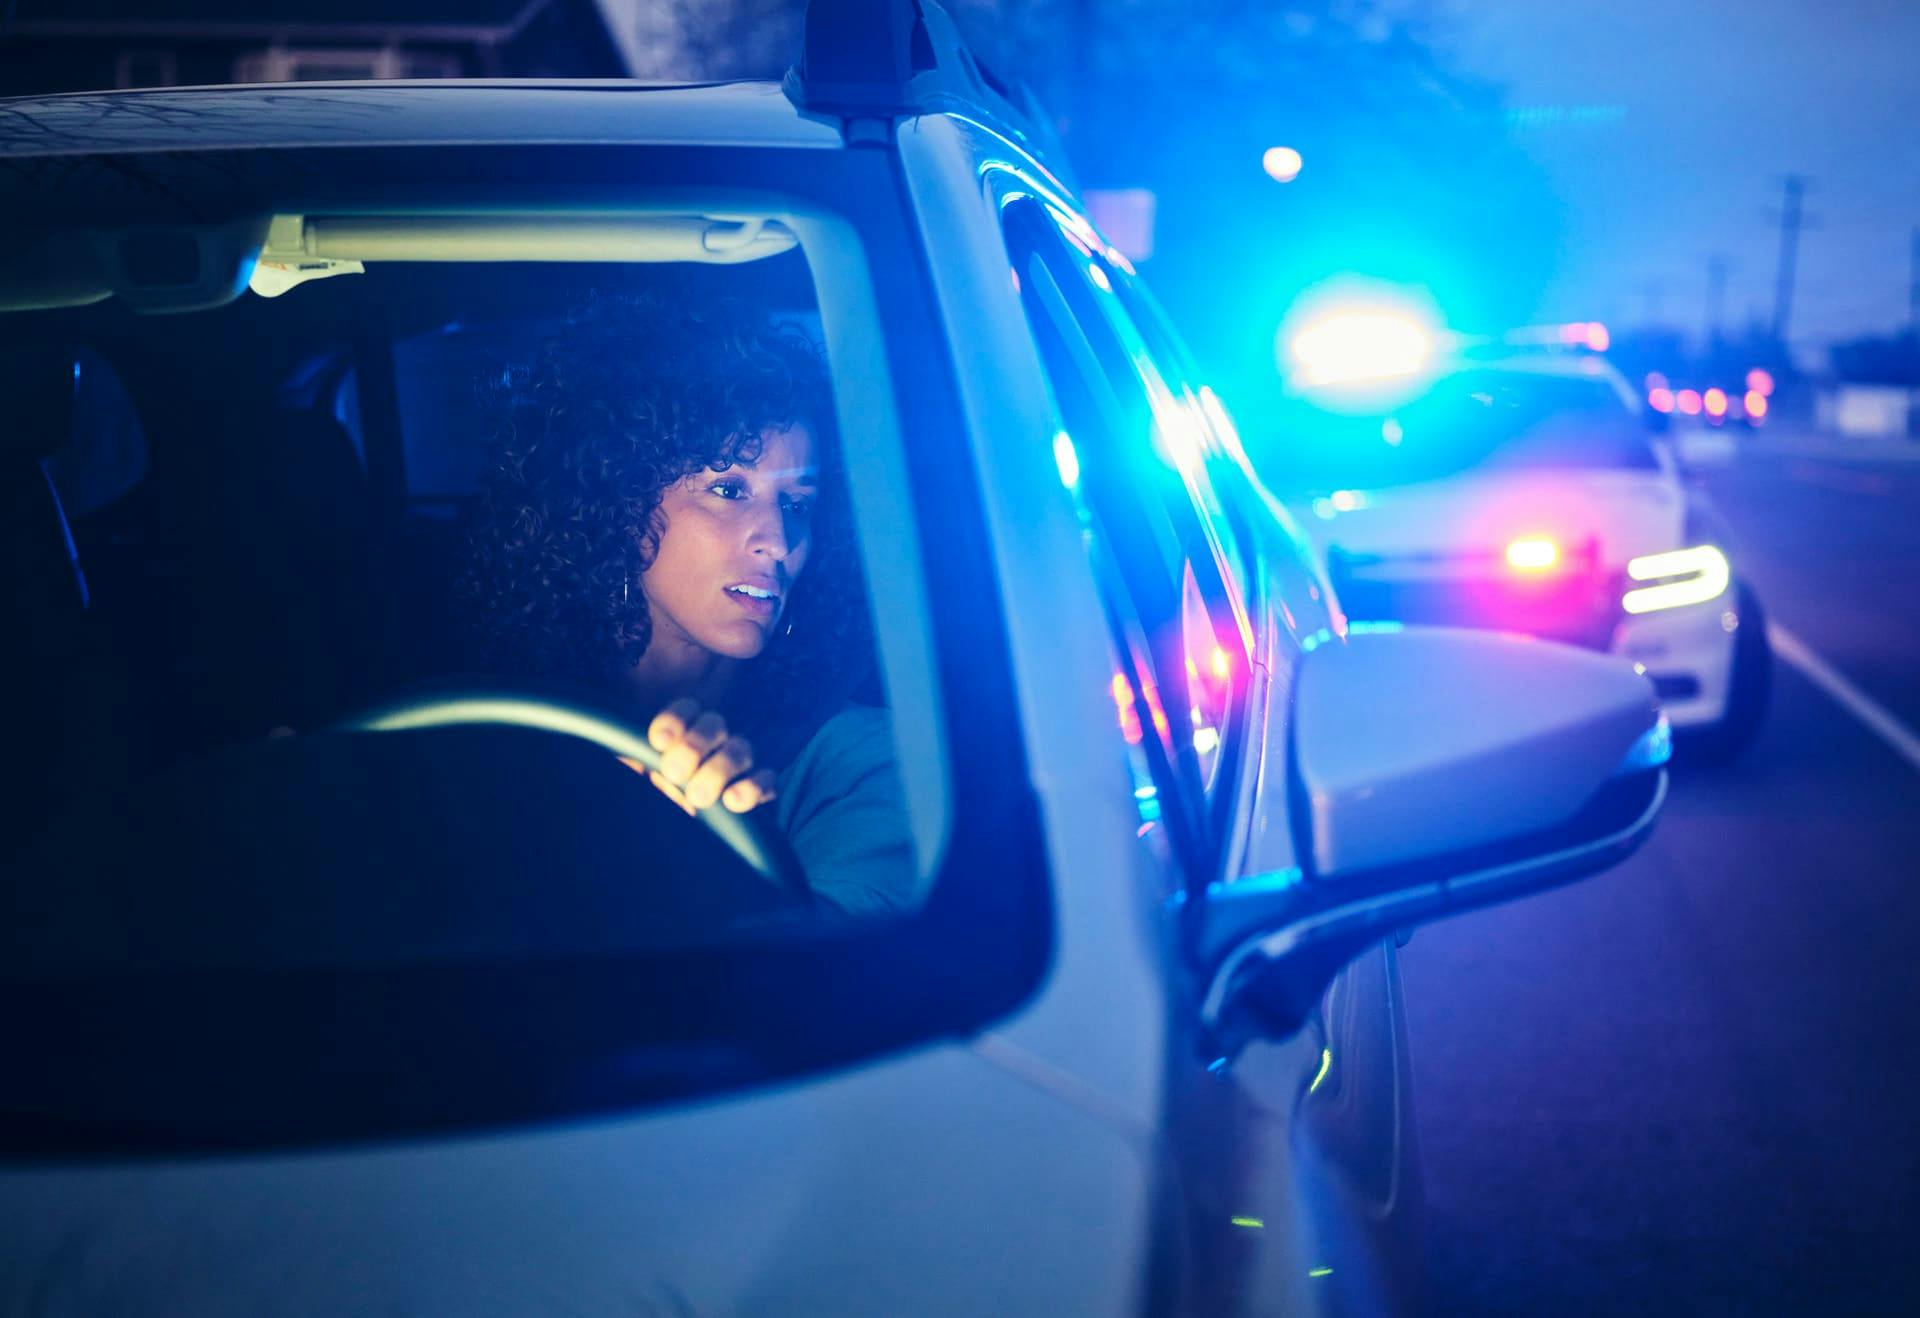 Woman getting pulled over.